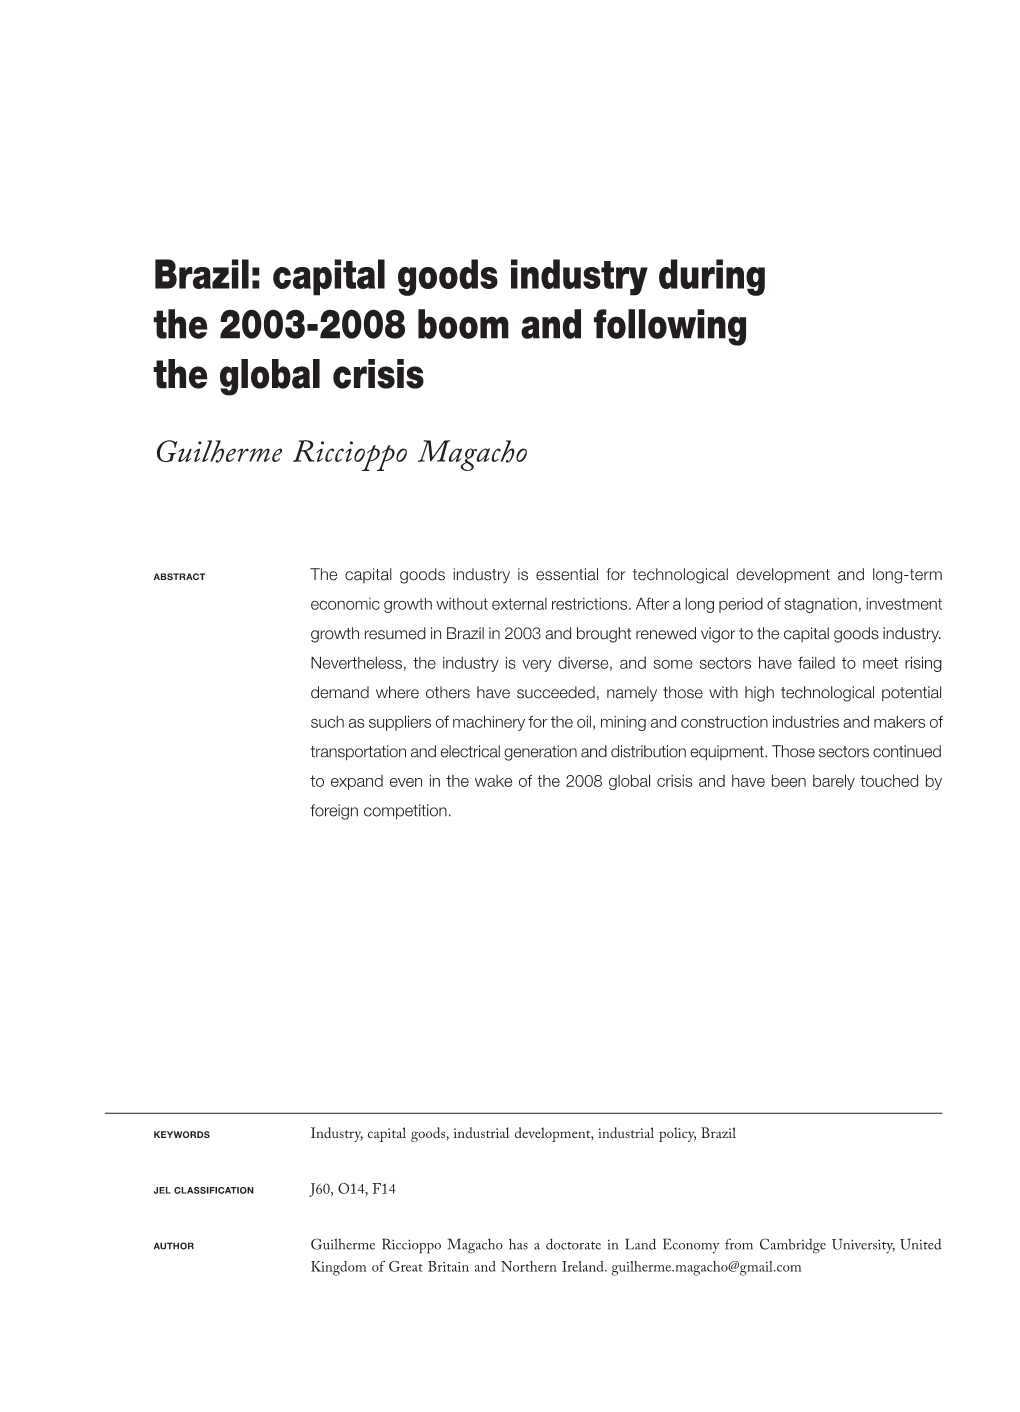 Brazil: Capital Goods Industry During the 2003-2008 Boom and Following the Global Crisis